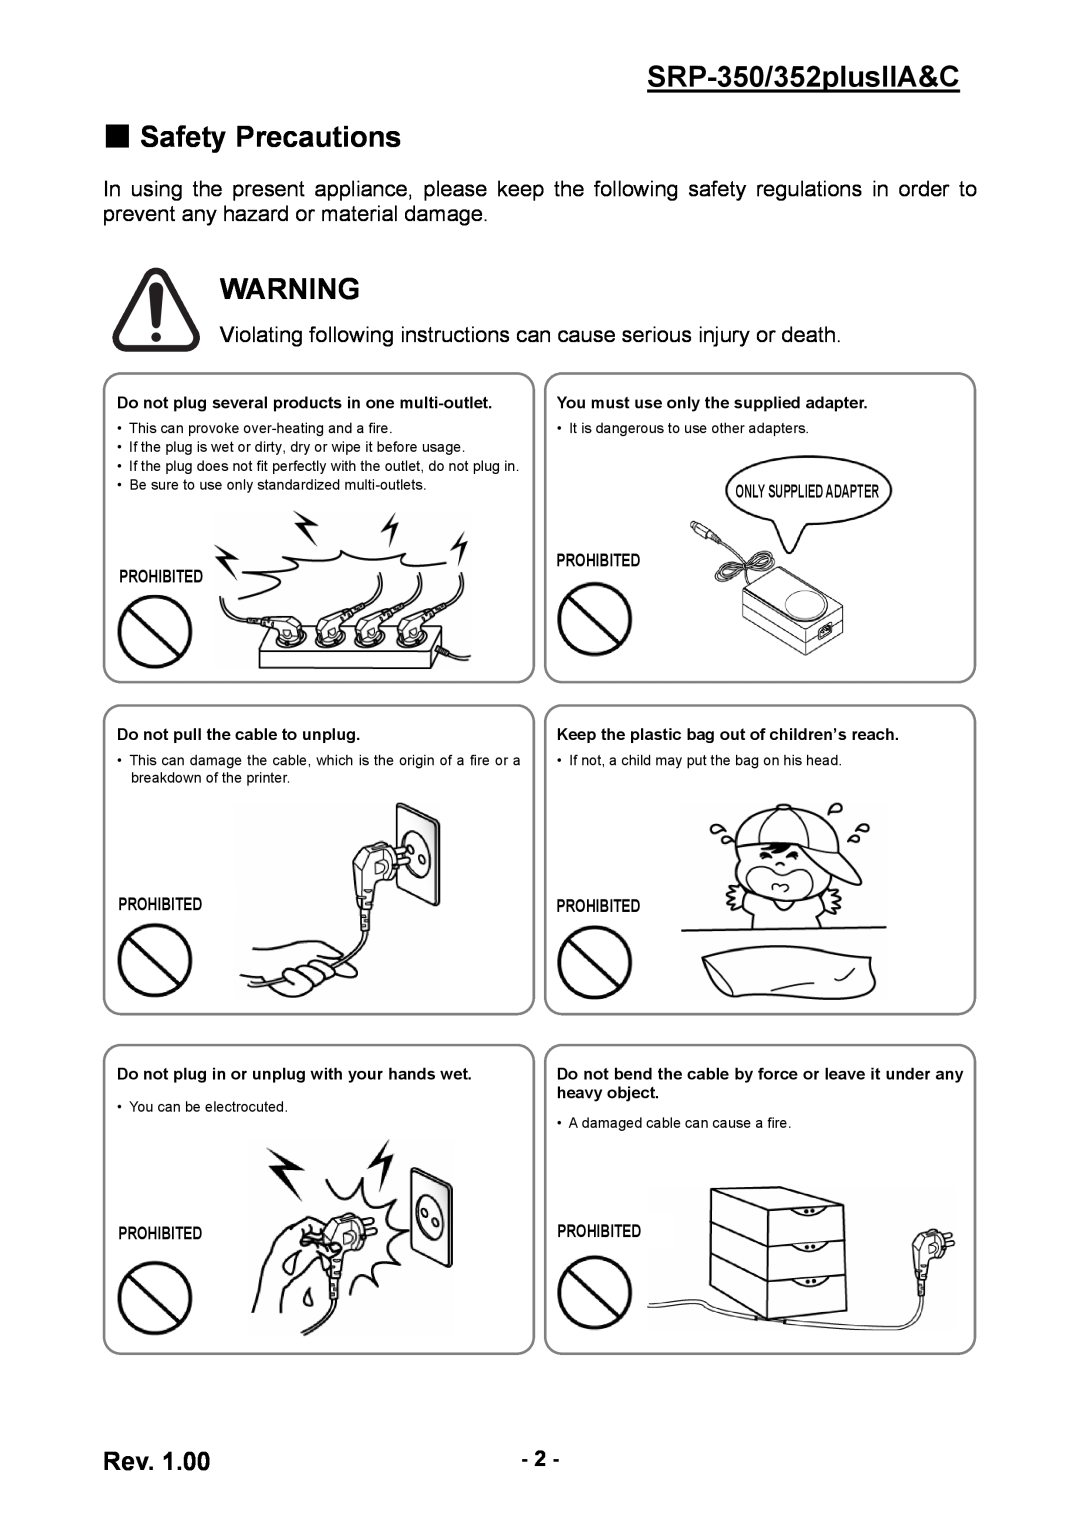 BIXOLON SRP-352 user manual SRP-350/352plusIIA&C Safety Precautions, Only Supplied Adapter Prohibited 